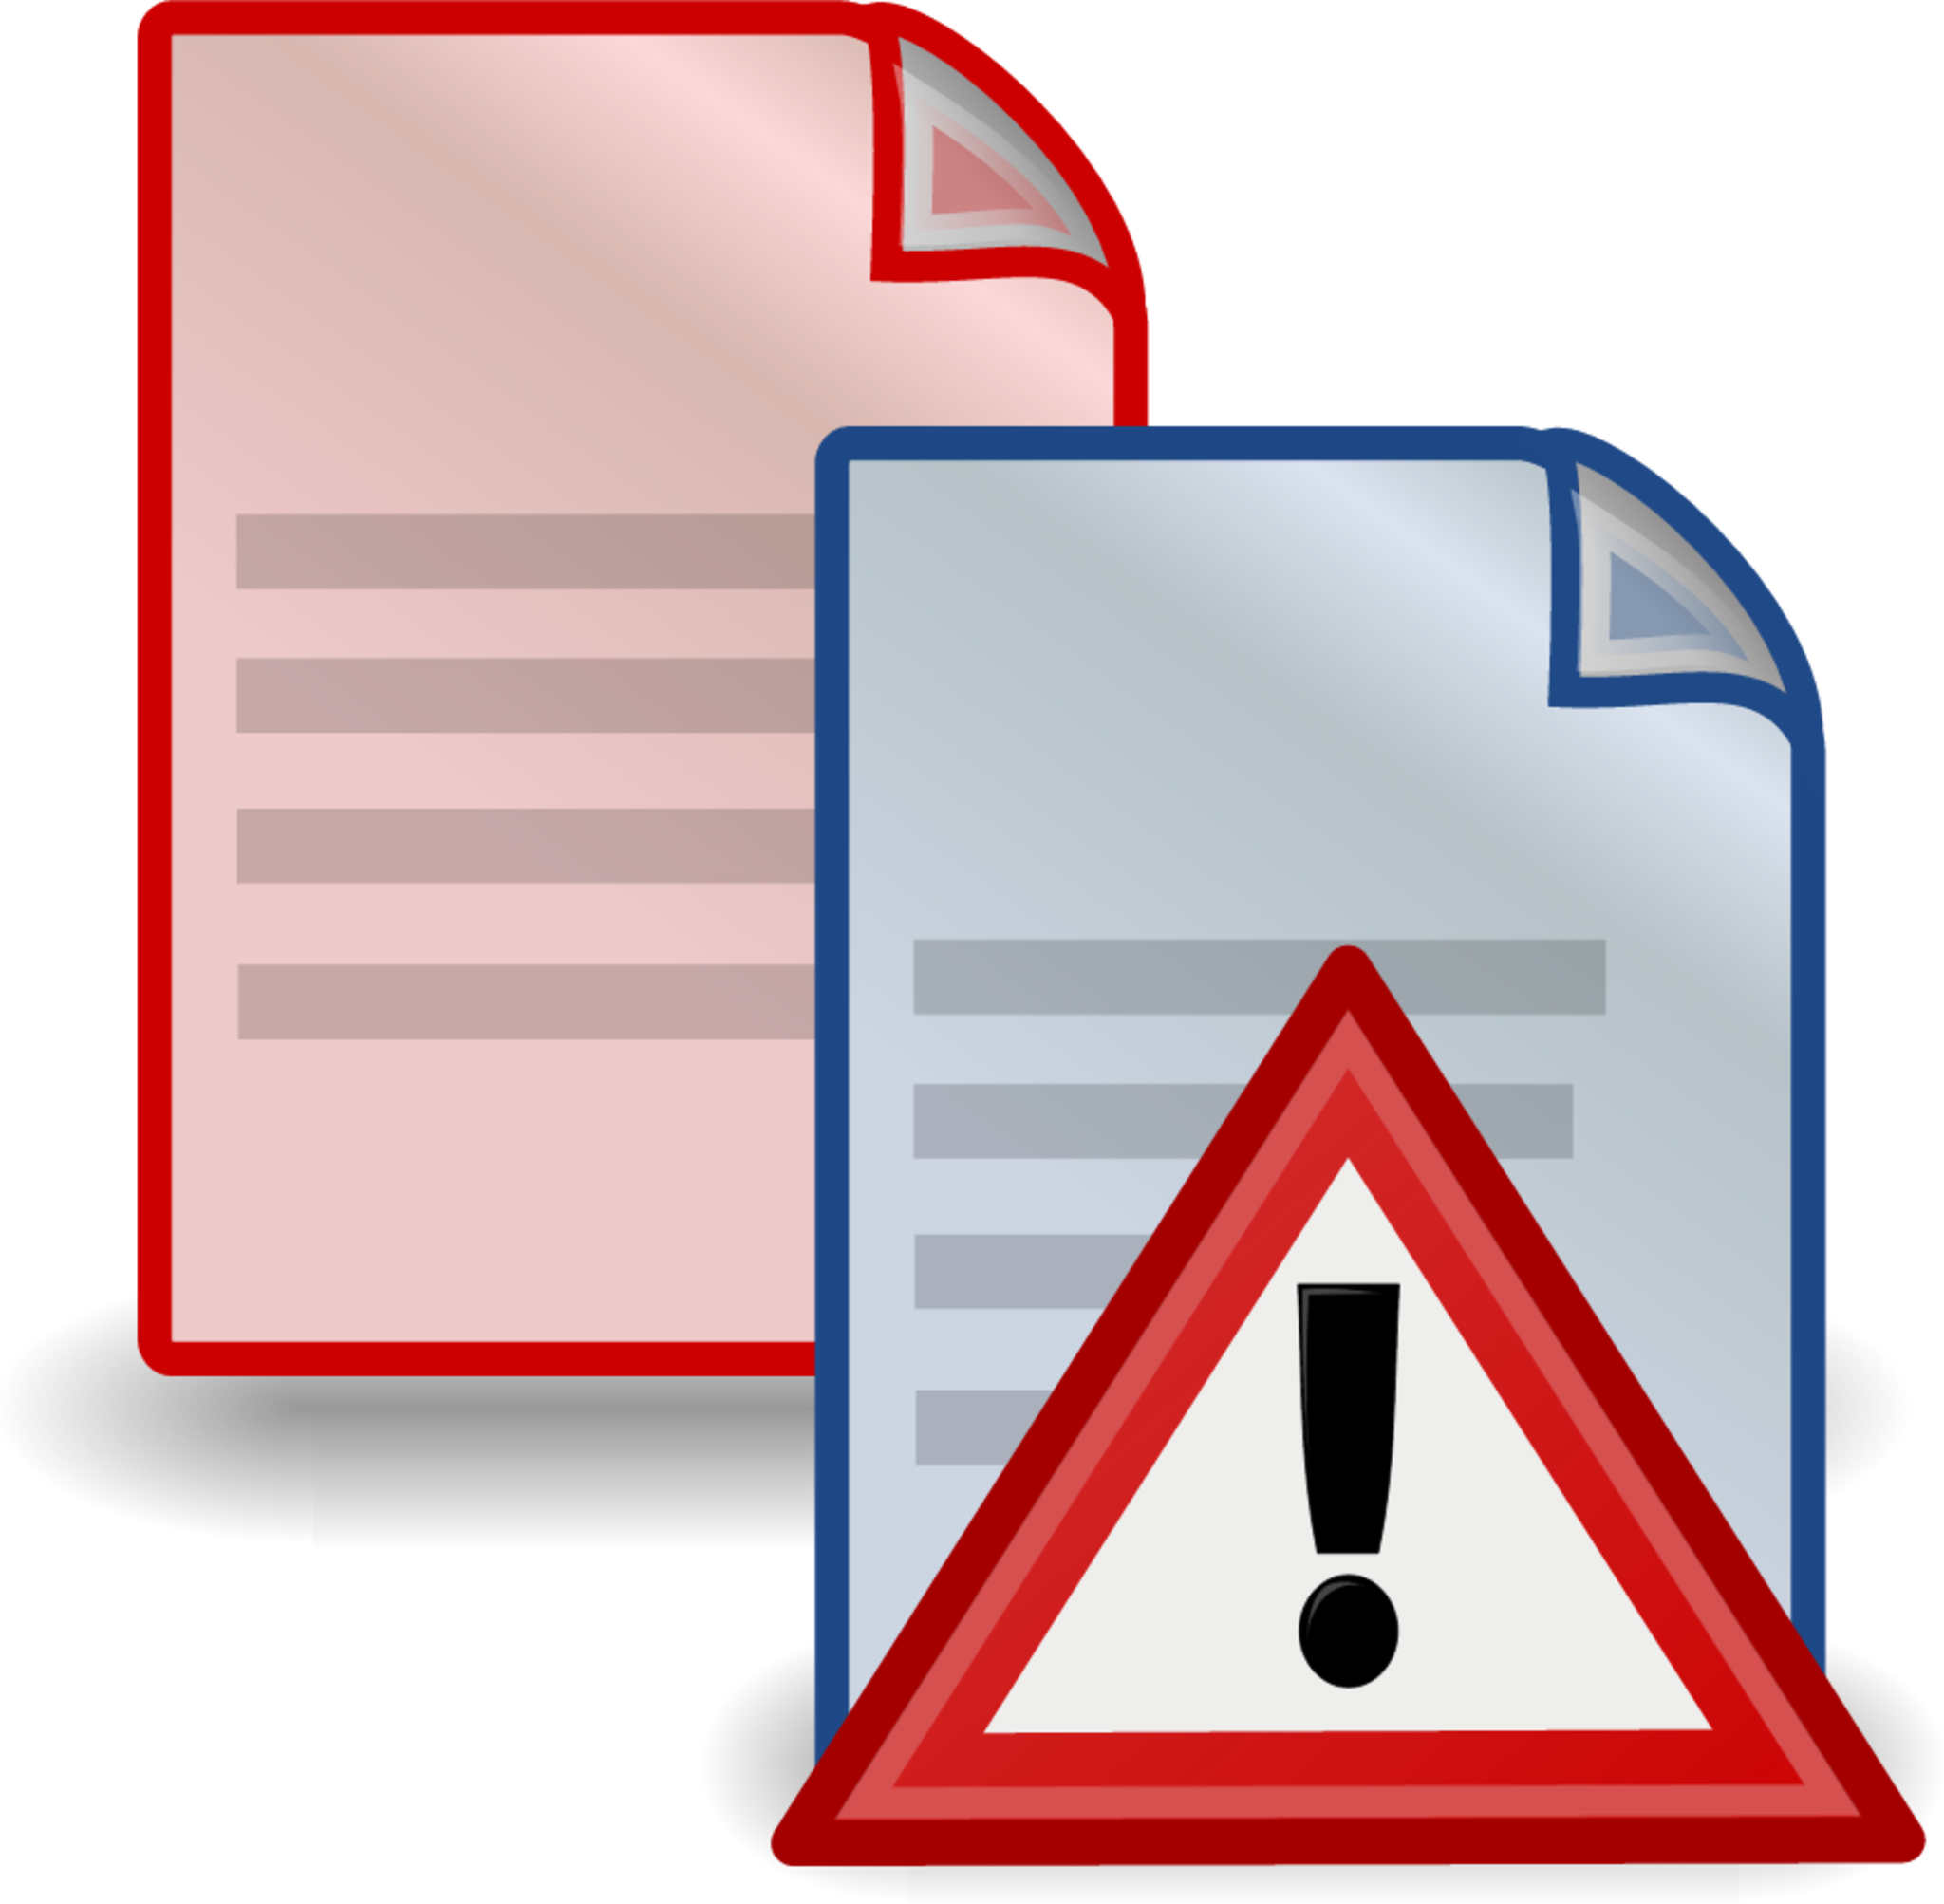 different documents icon